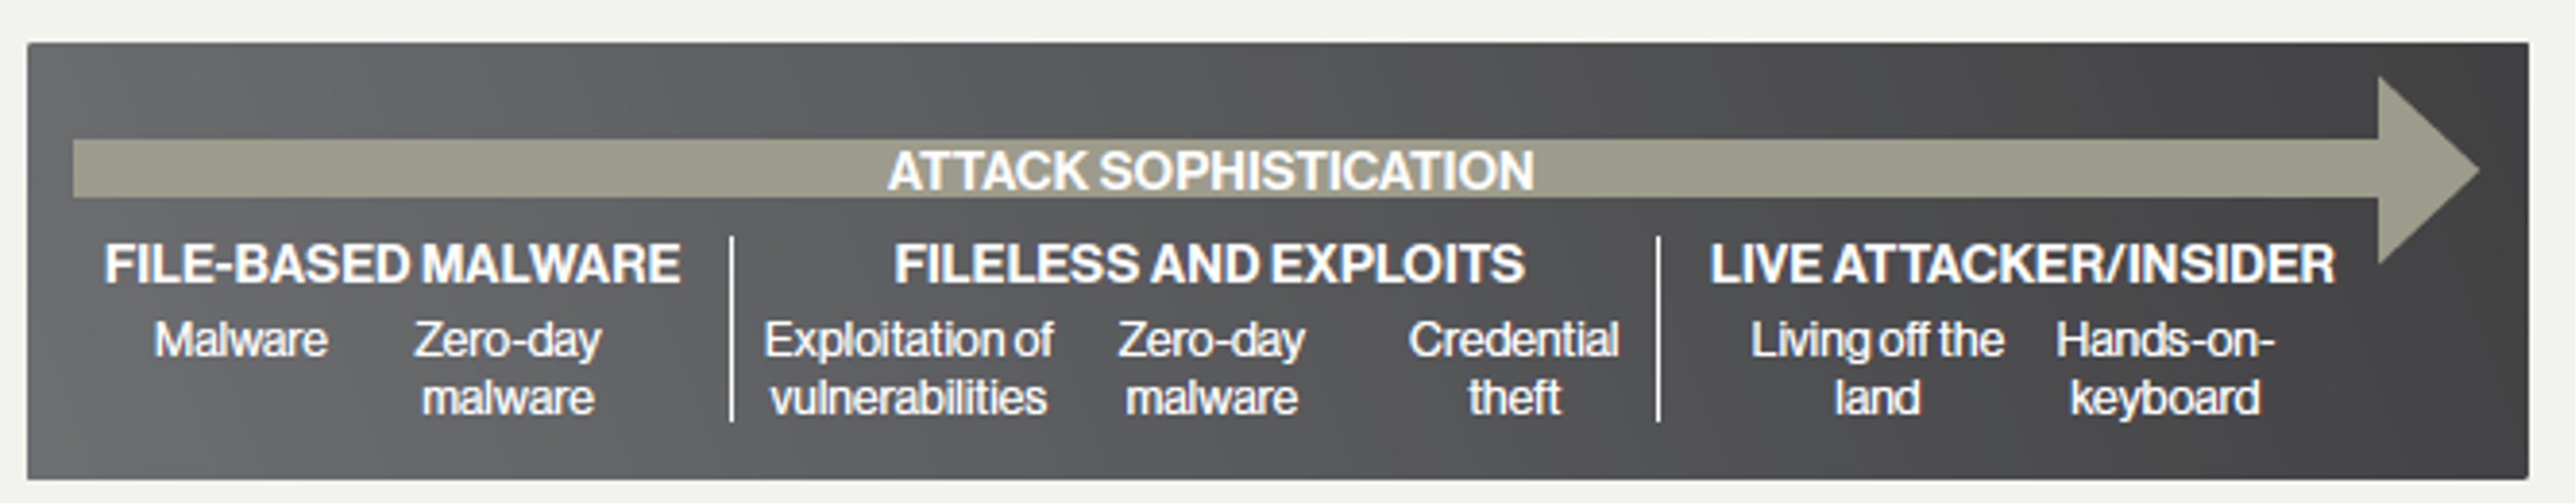 https://www.crowdstrike.com/wp-content/uploads/2022/03/Picture1-11.png